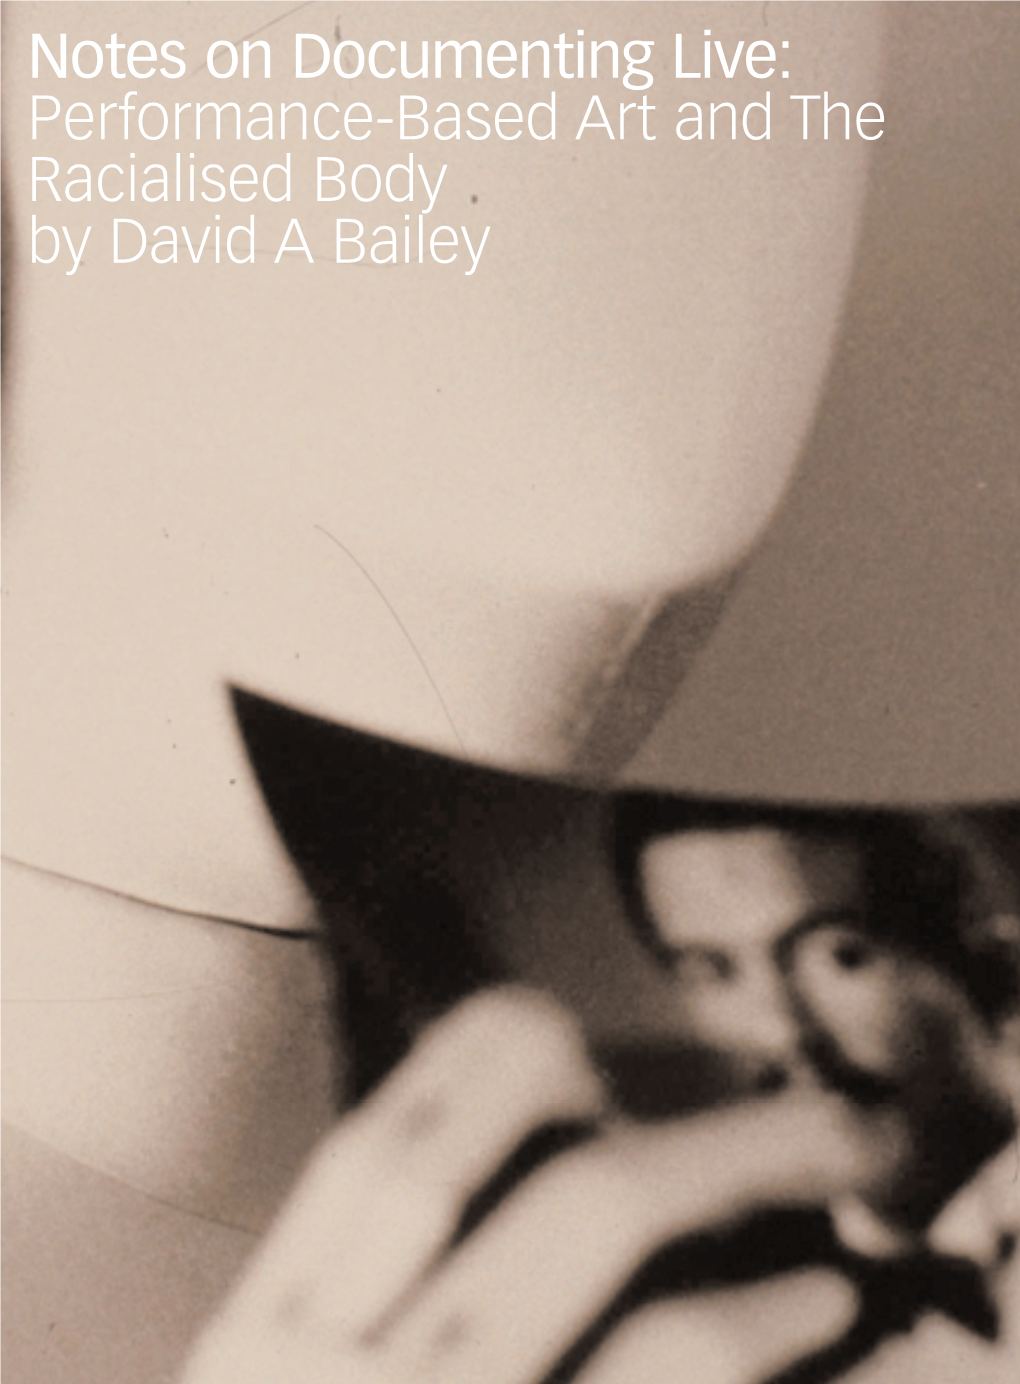 Performance-Based Art and the Racialised Body by David a Bailey Introduction